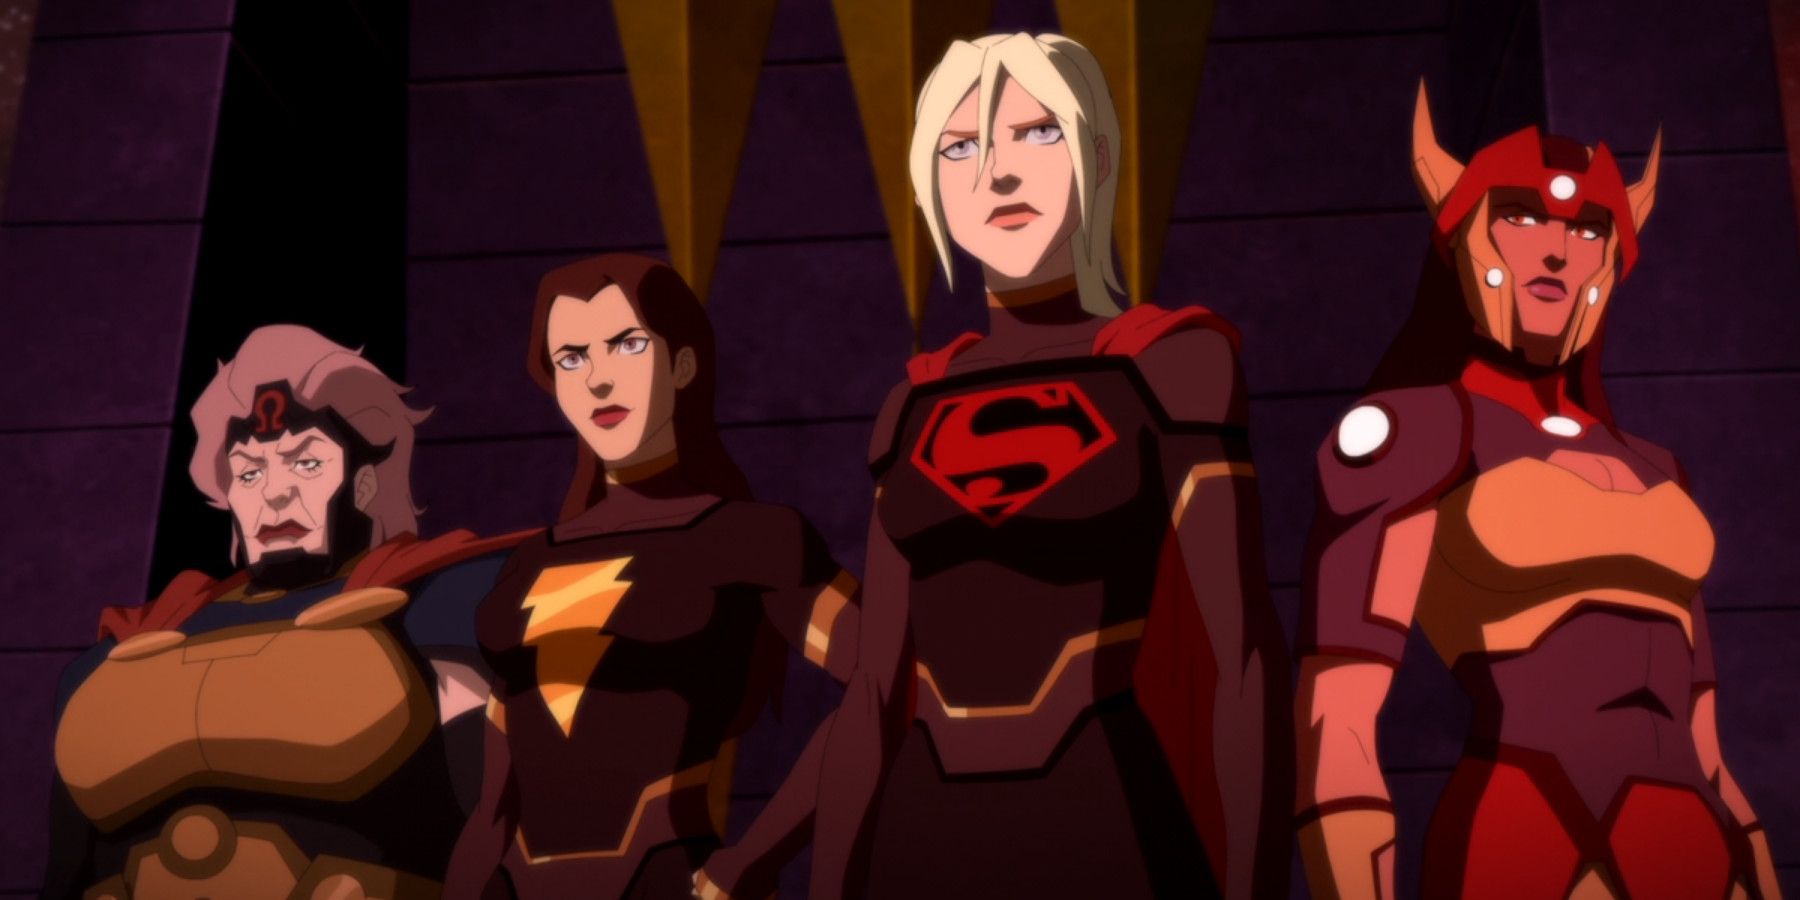 Young Justice Phantoms Season 4 Finale Granny Goodness Female Furies With Black Mary Marvel Supergirl Kara Zor-El and Big Barda